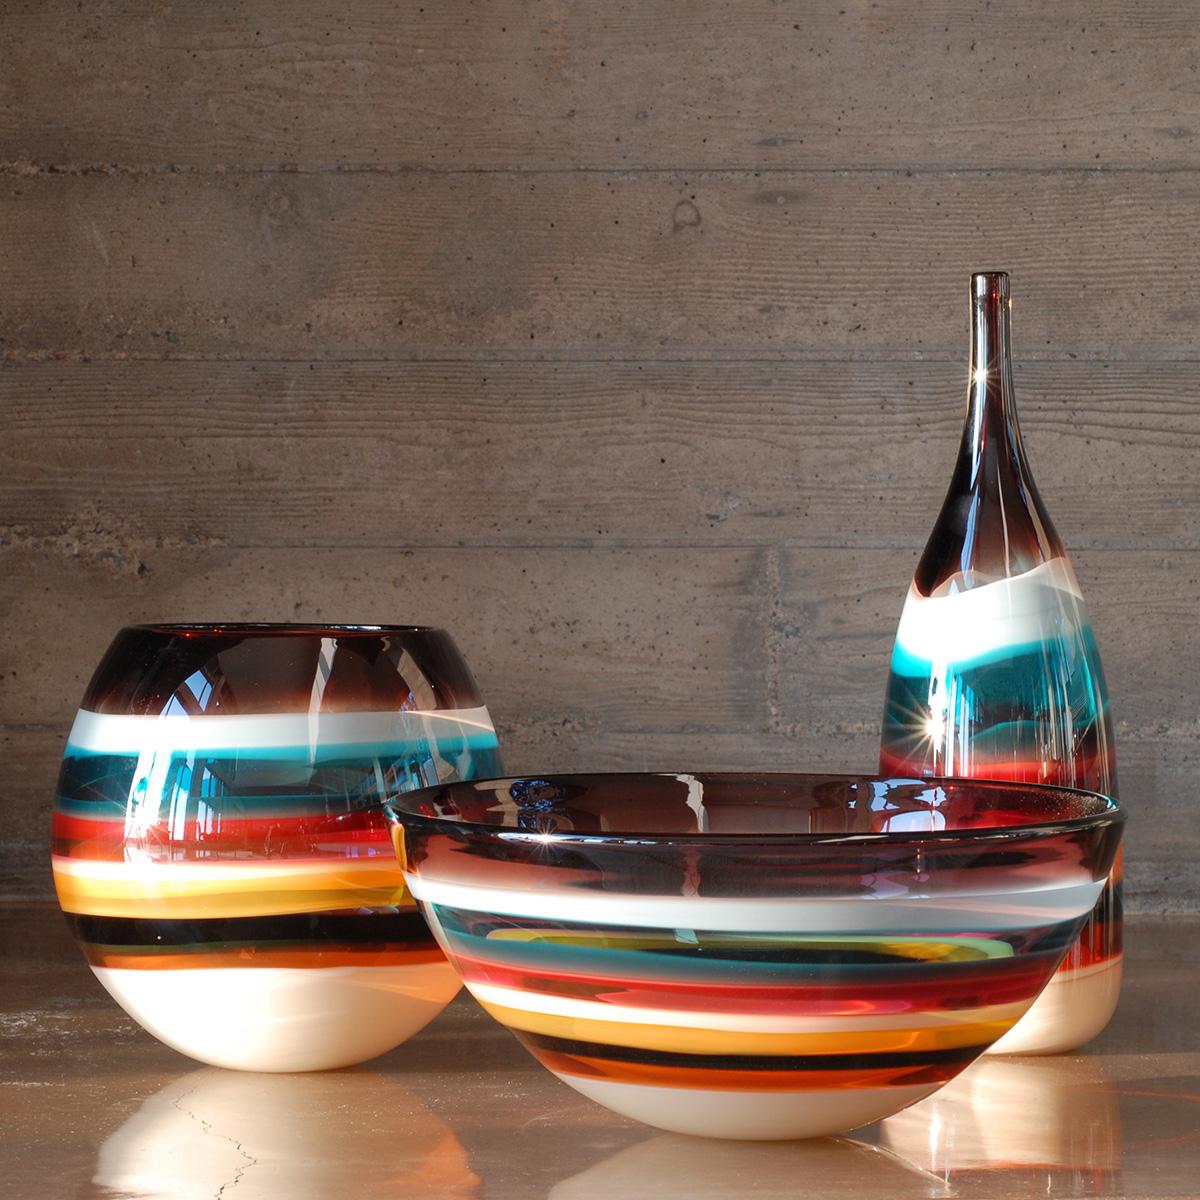 These striking pieces draw inspiration from the rich hues and undulating topography of Southern California. Alternating layers of opaque and transparent colors are applied to clear glass. Overlaps create opportunities for new colors to be formed,